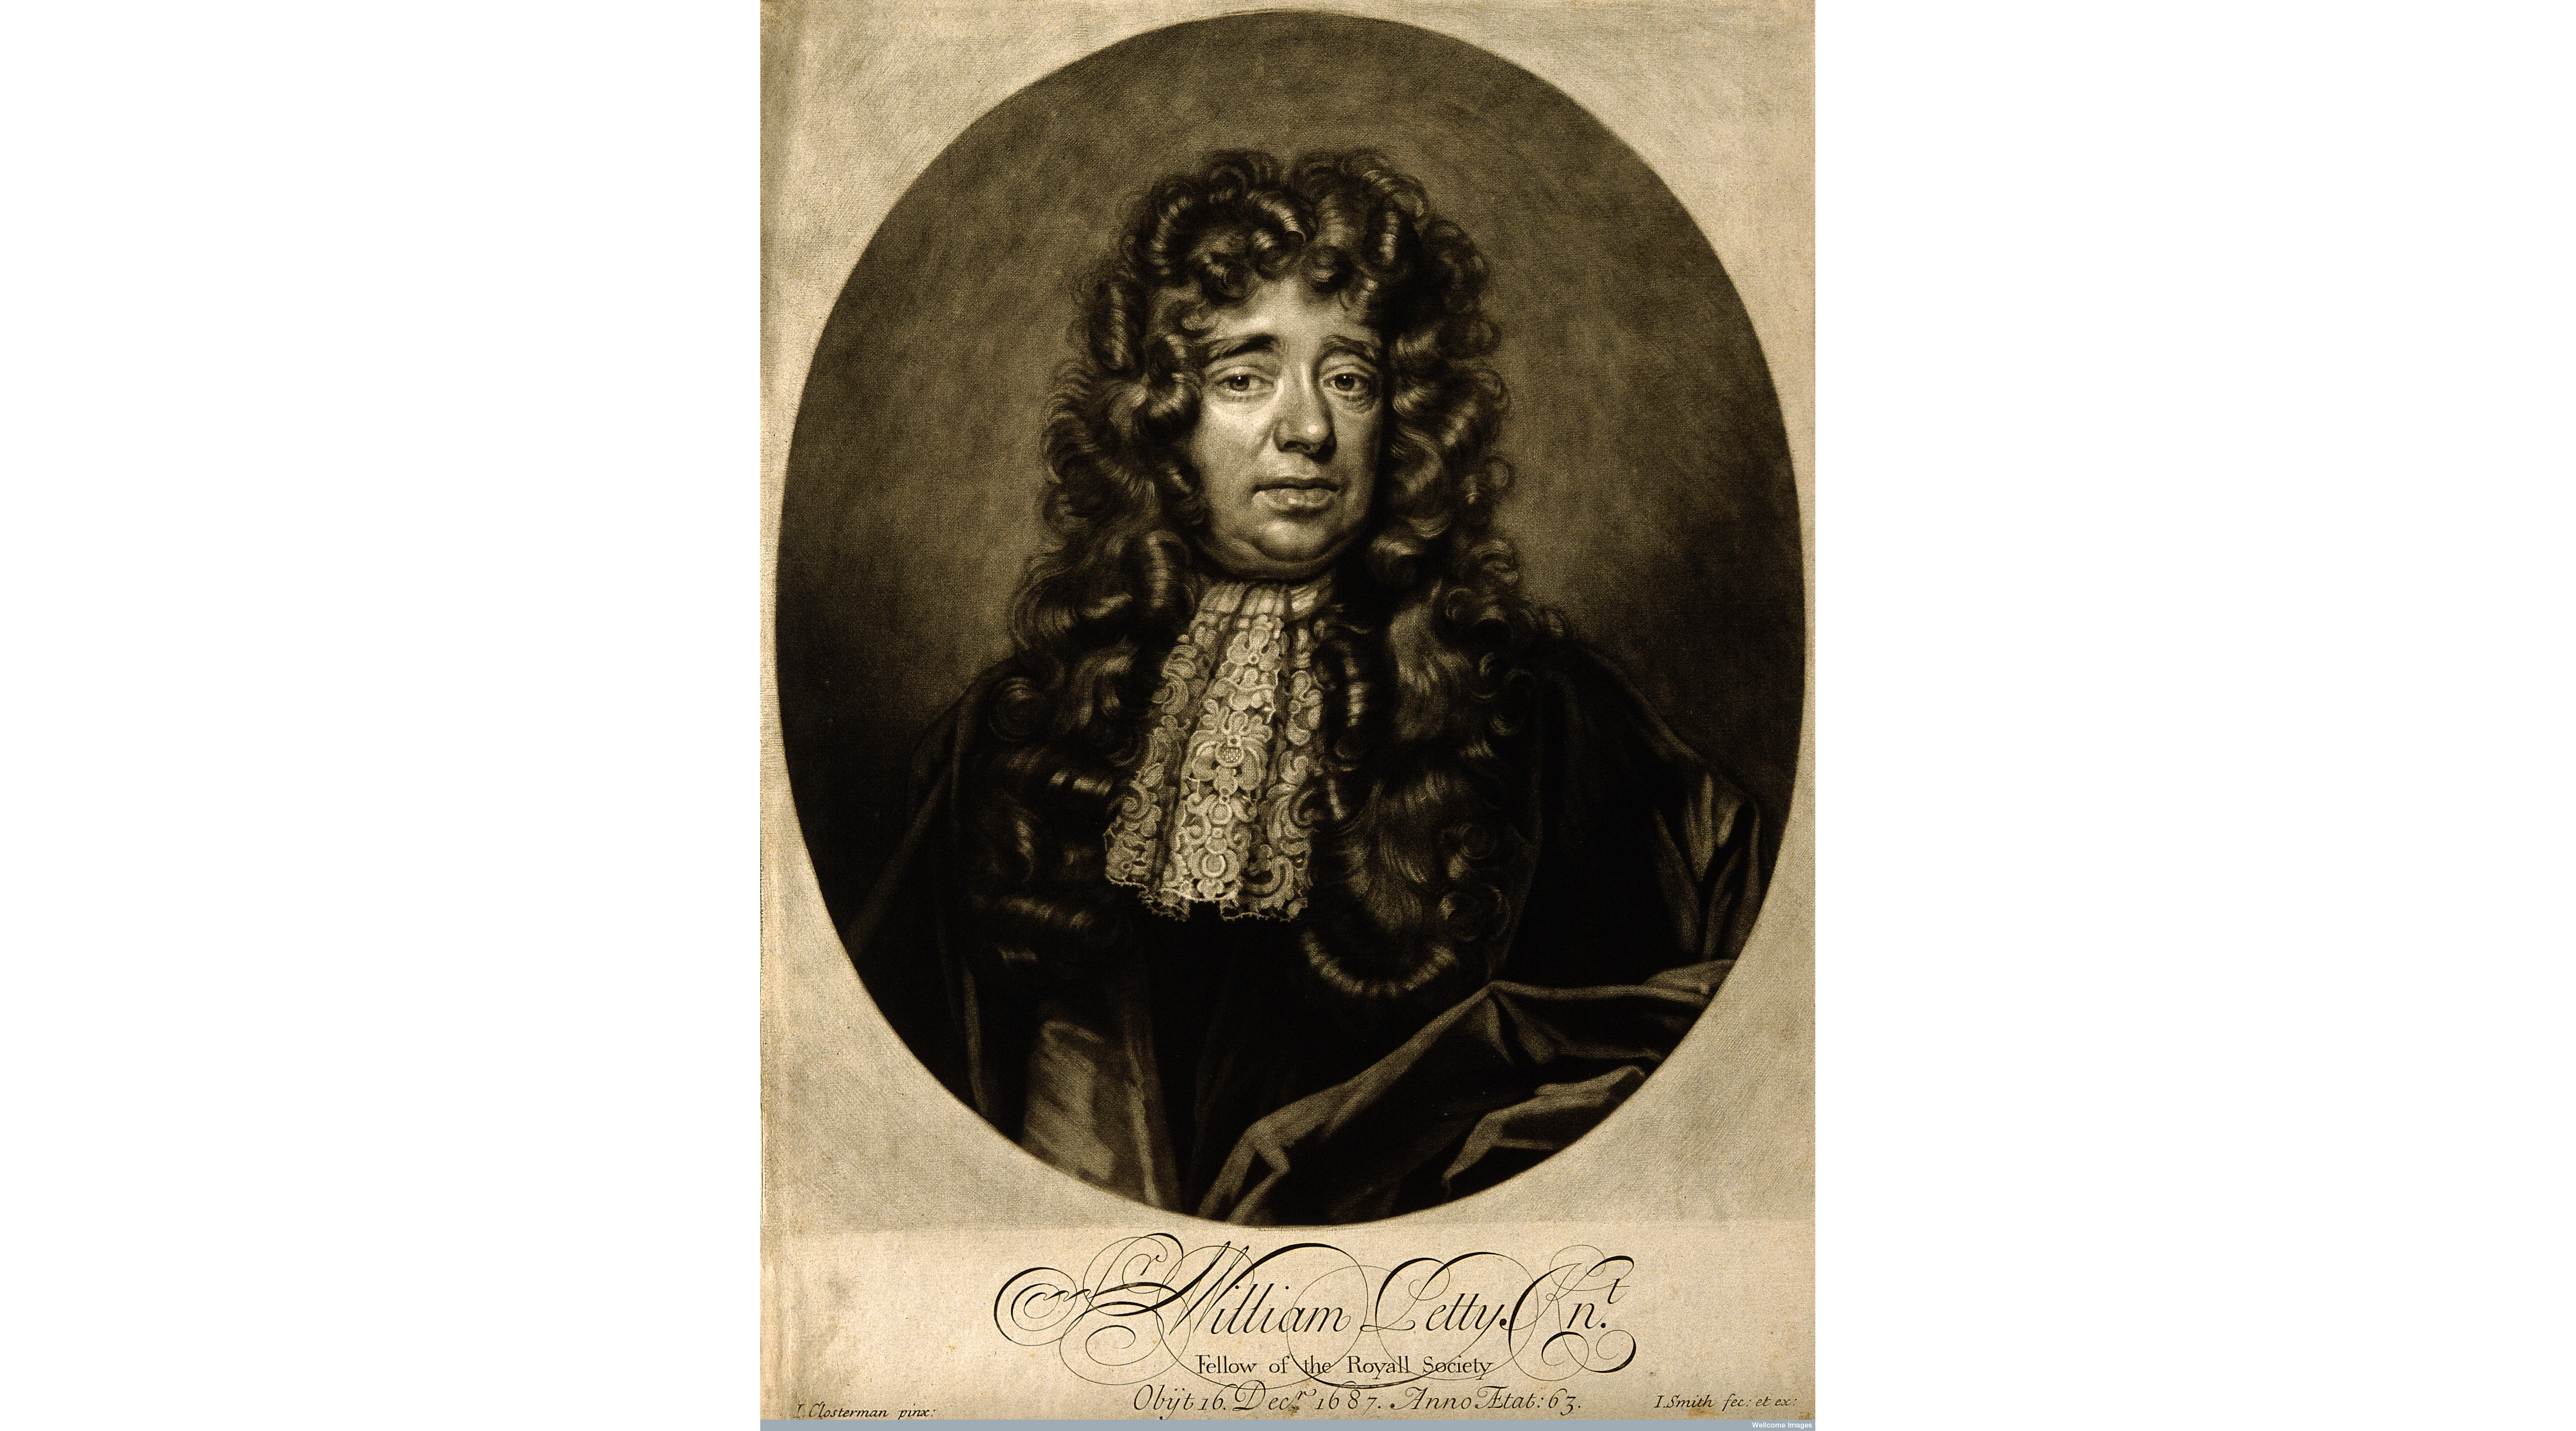 Sir William Petty. Mezzotint by J Smith, after J Closterman, 1696. Wellcome Library, London.